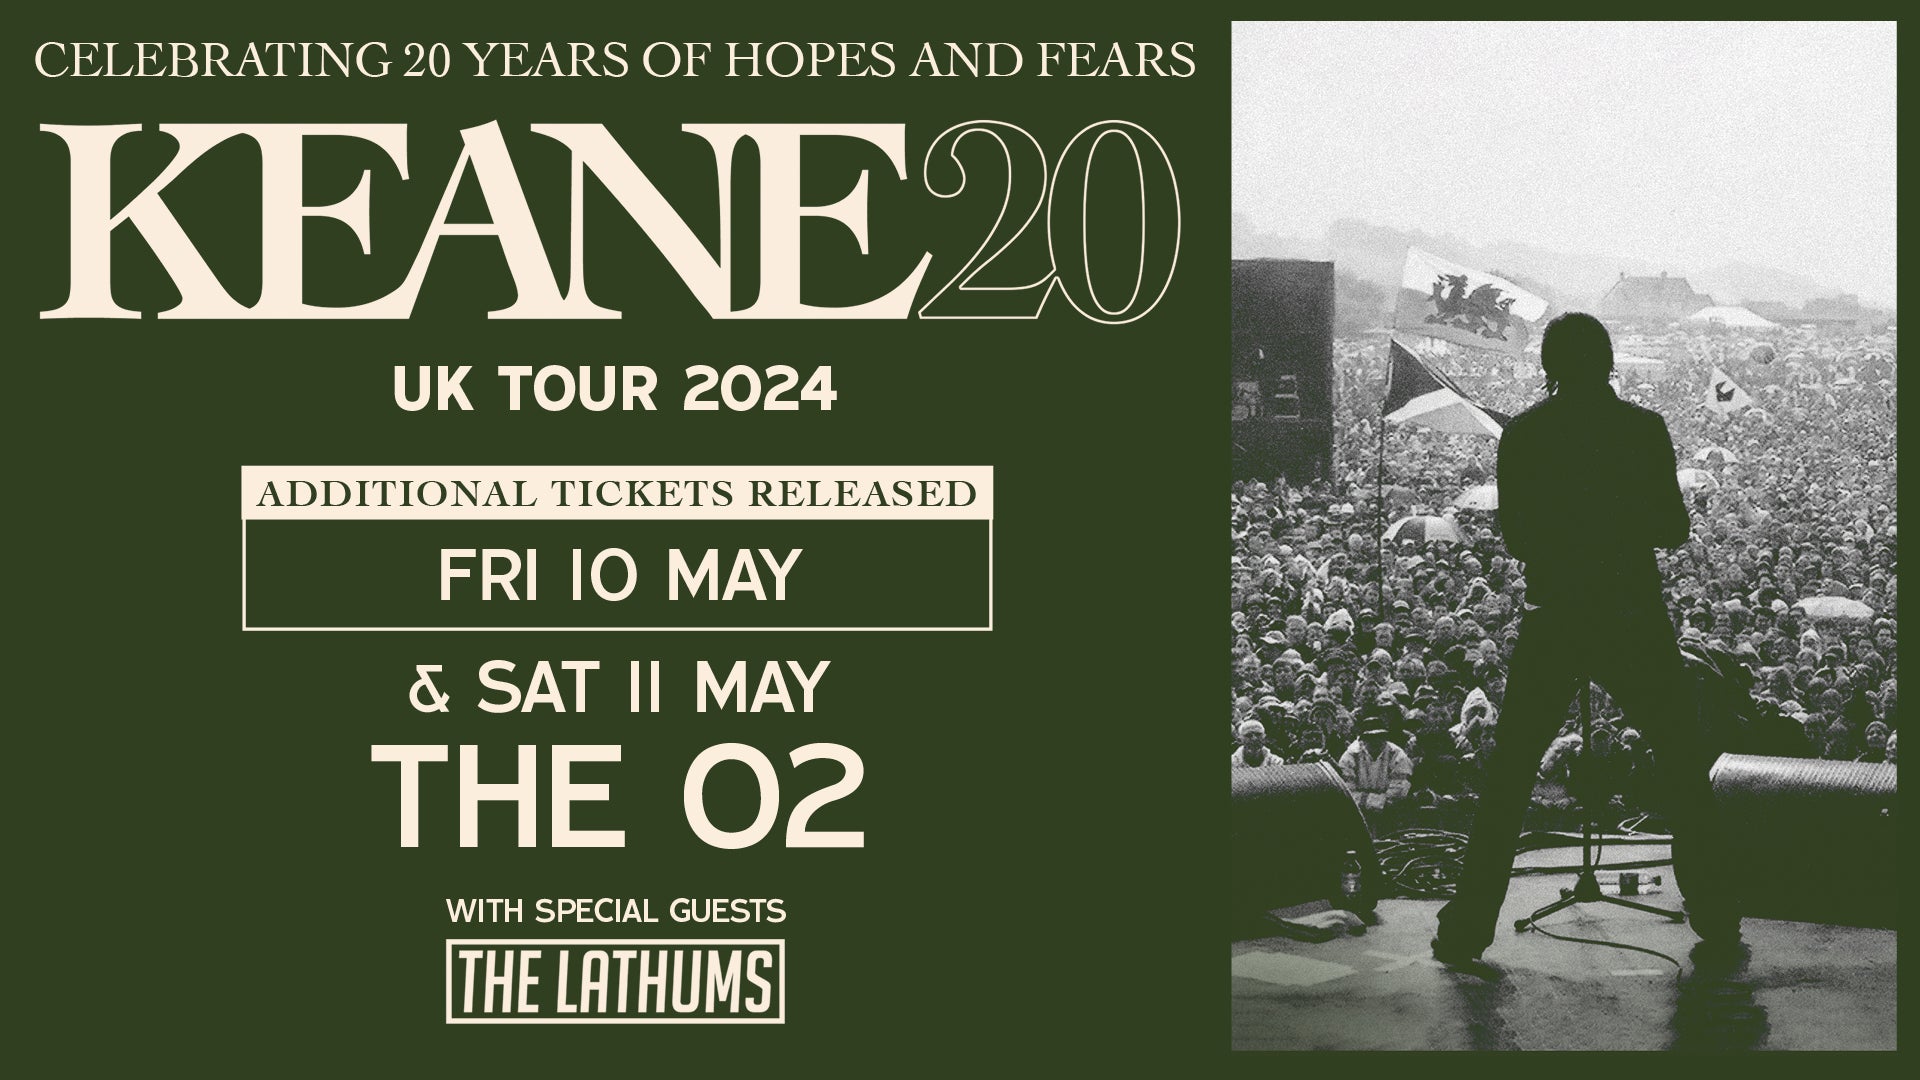 Event artwork for Keane's 20th-anniversary, featuring a black and white photo of a concert crowd and details of UK tour dates at The O2 with special guests The Lathums.